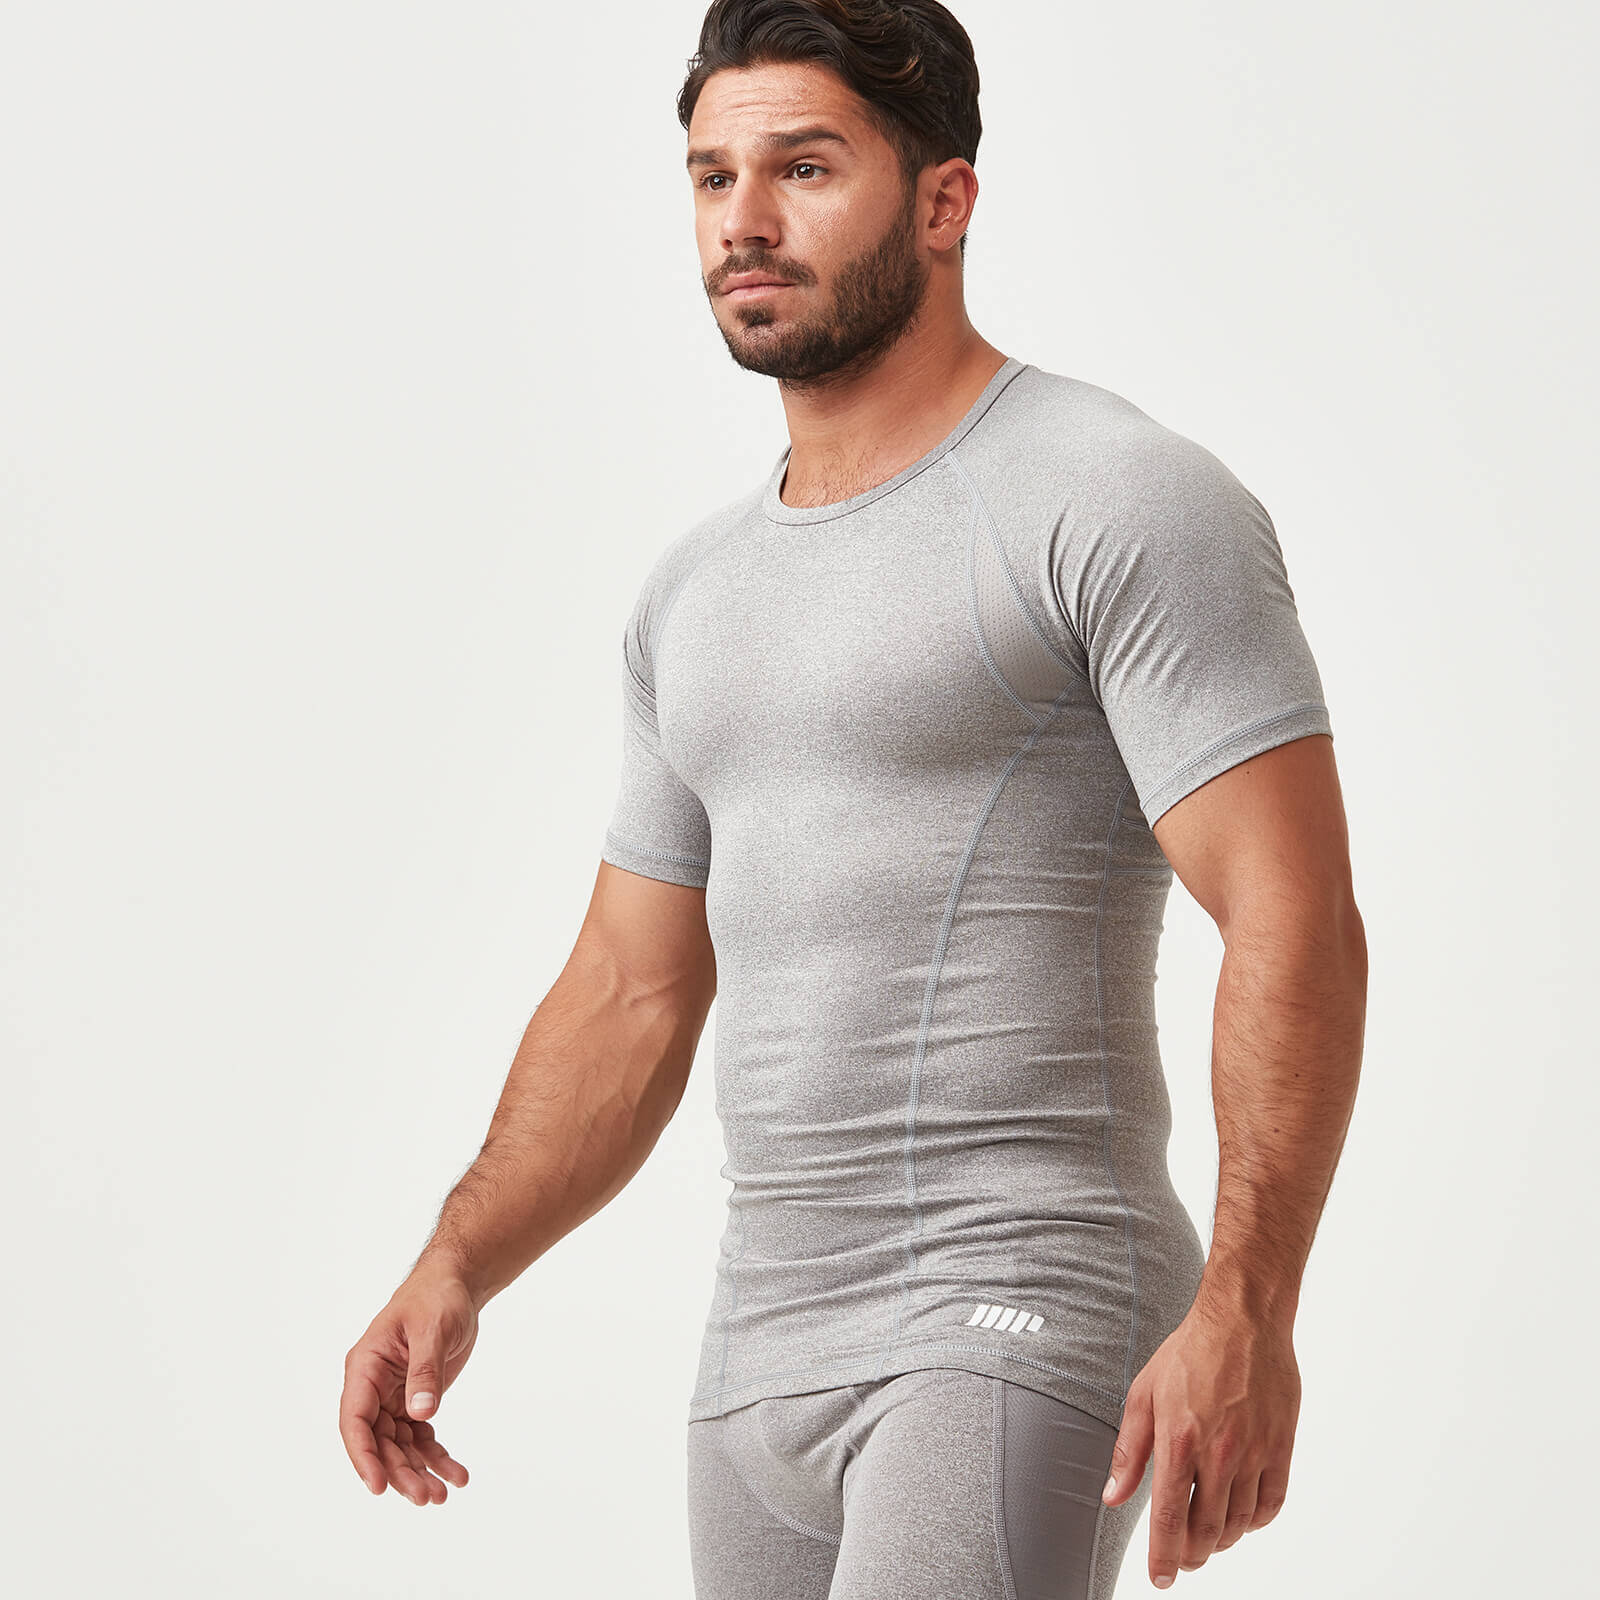 Charge Compression Short-Sleeve Top